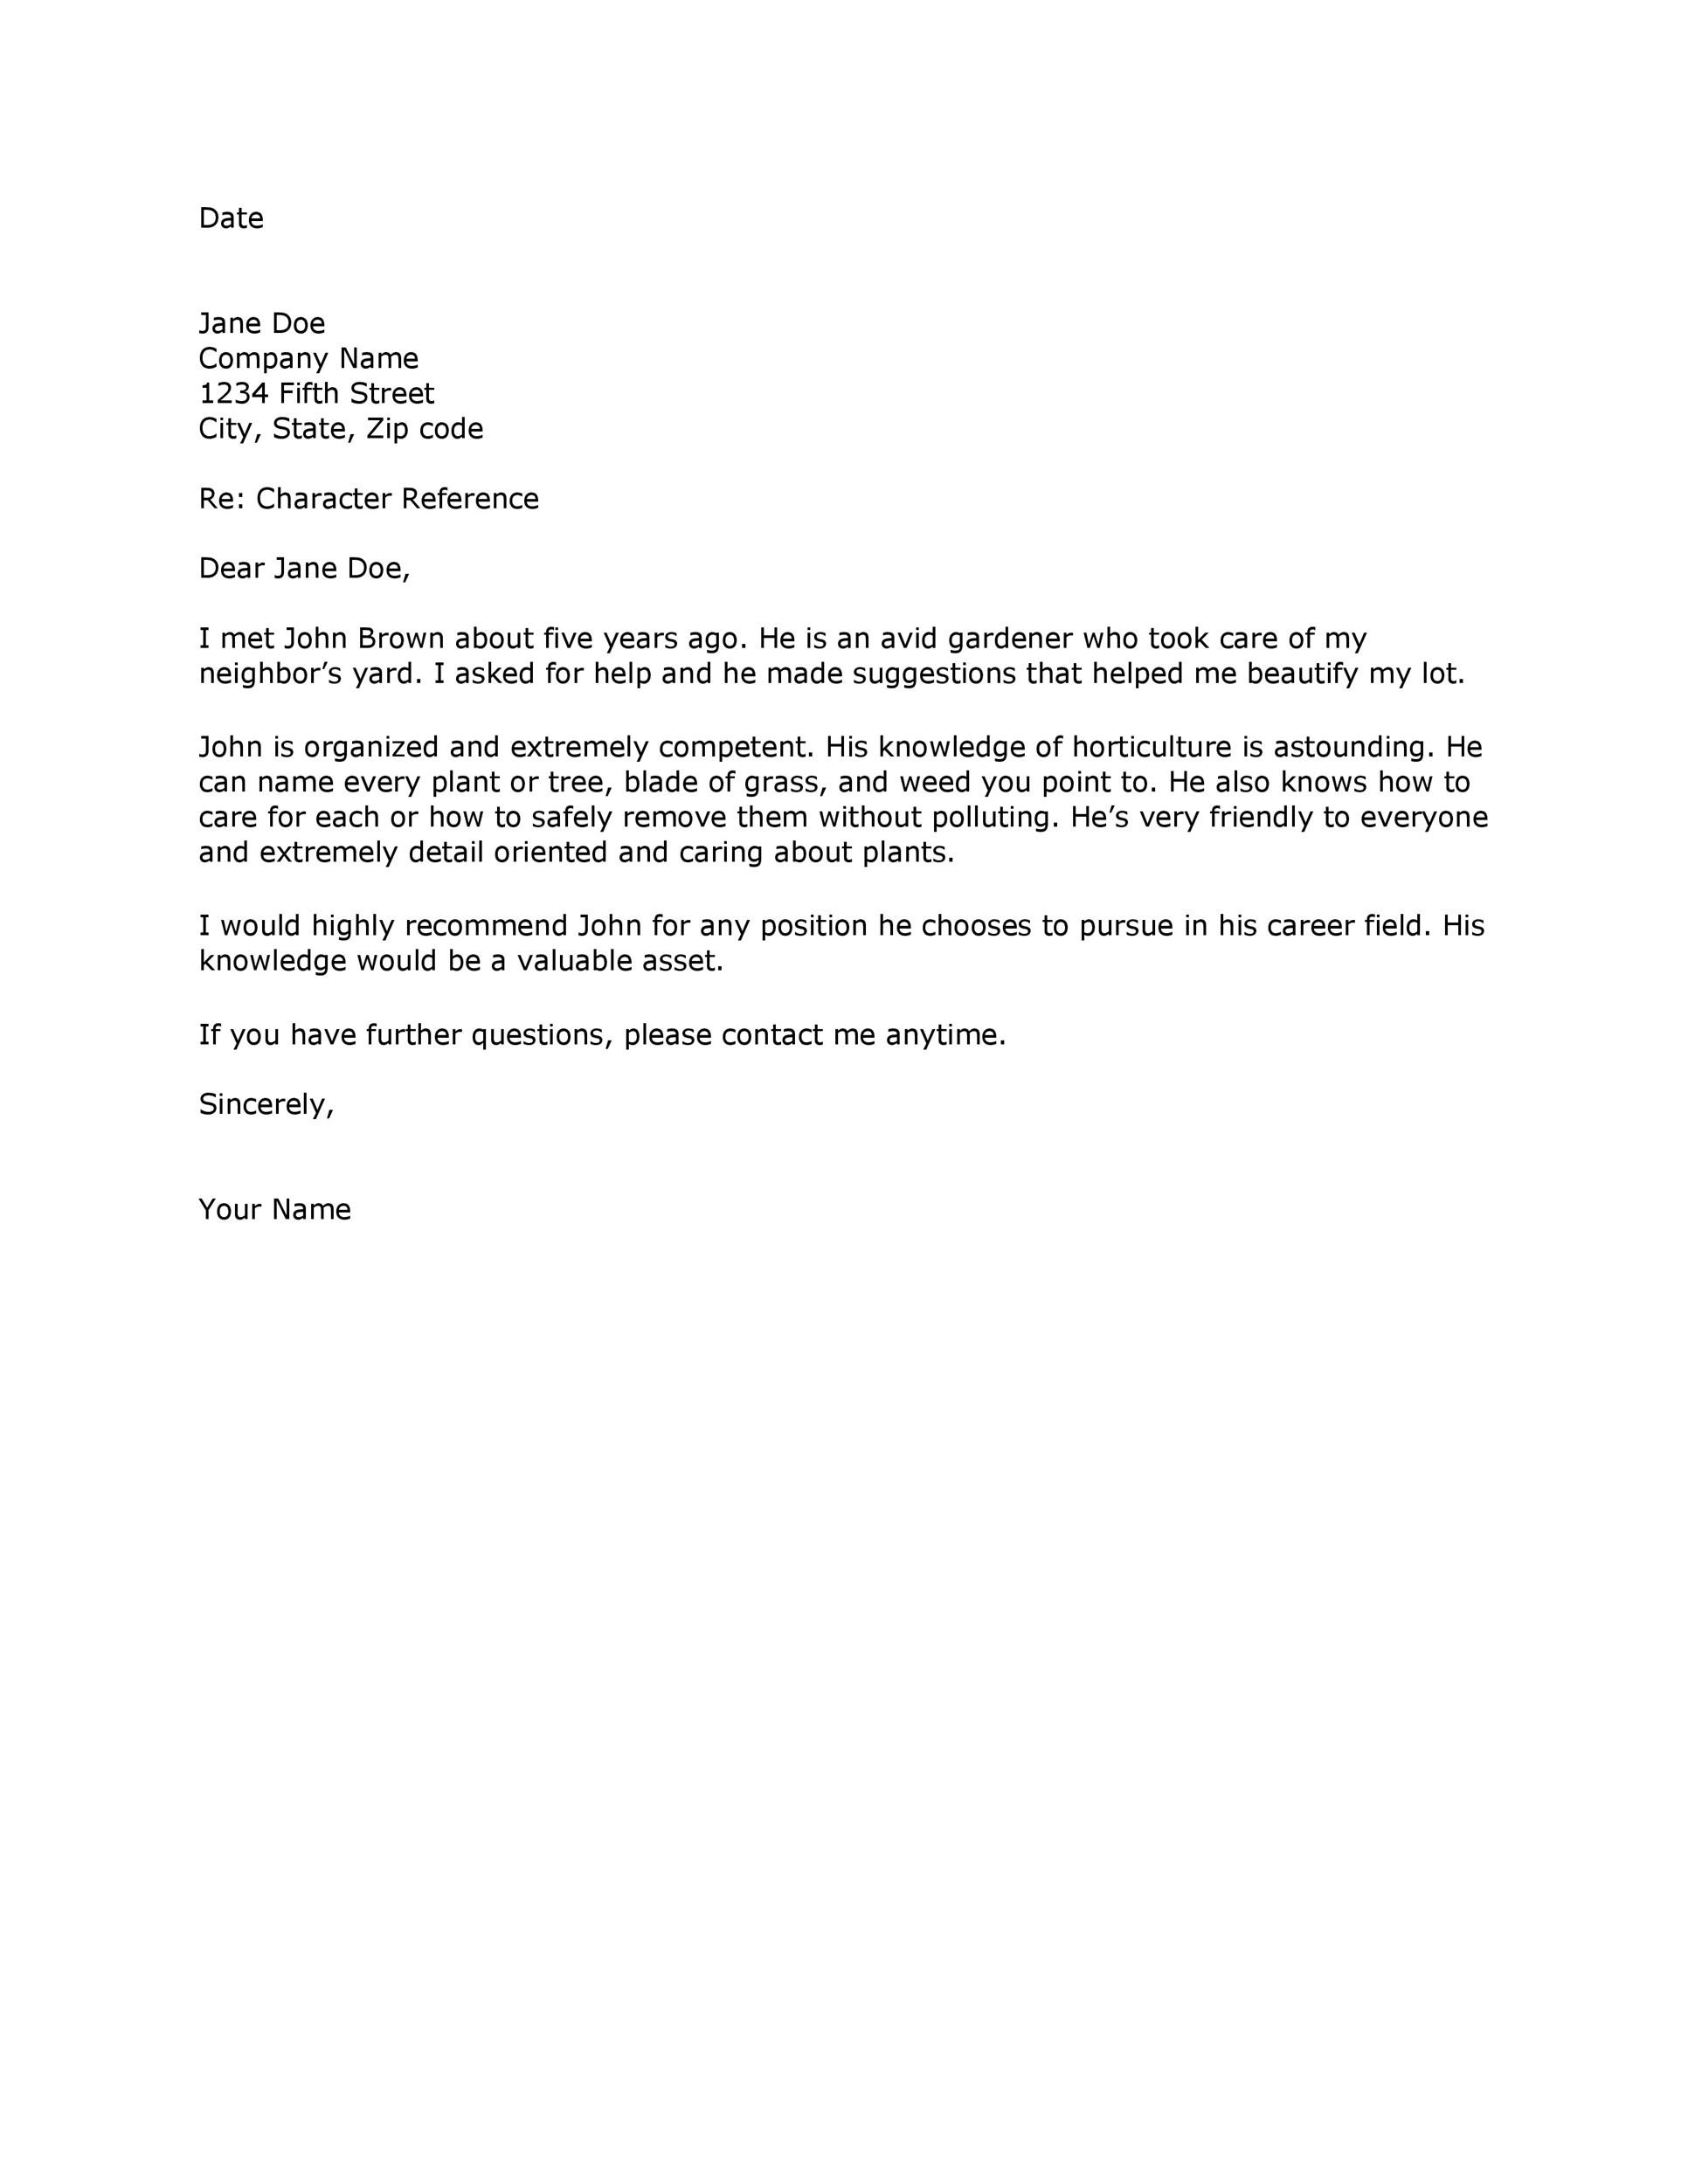 Child Care Reference Letter from templatelab.com